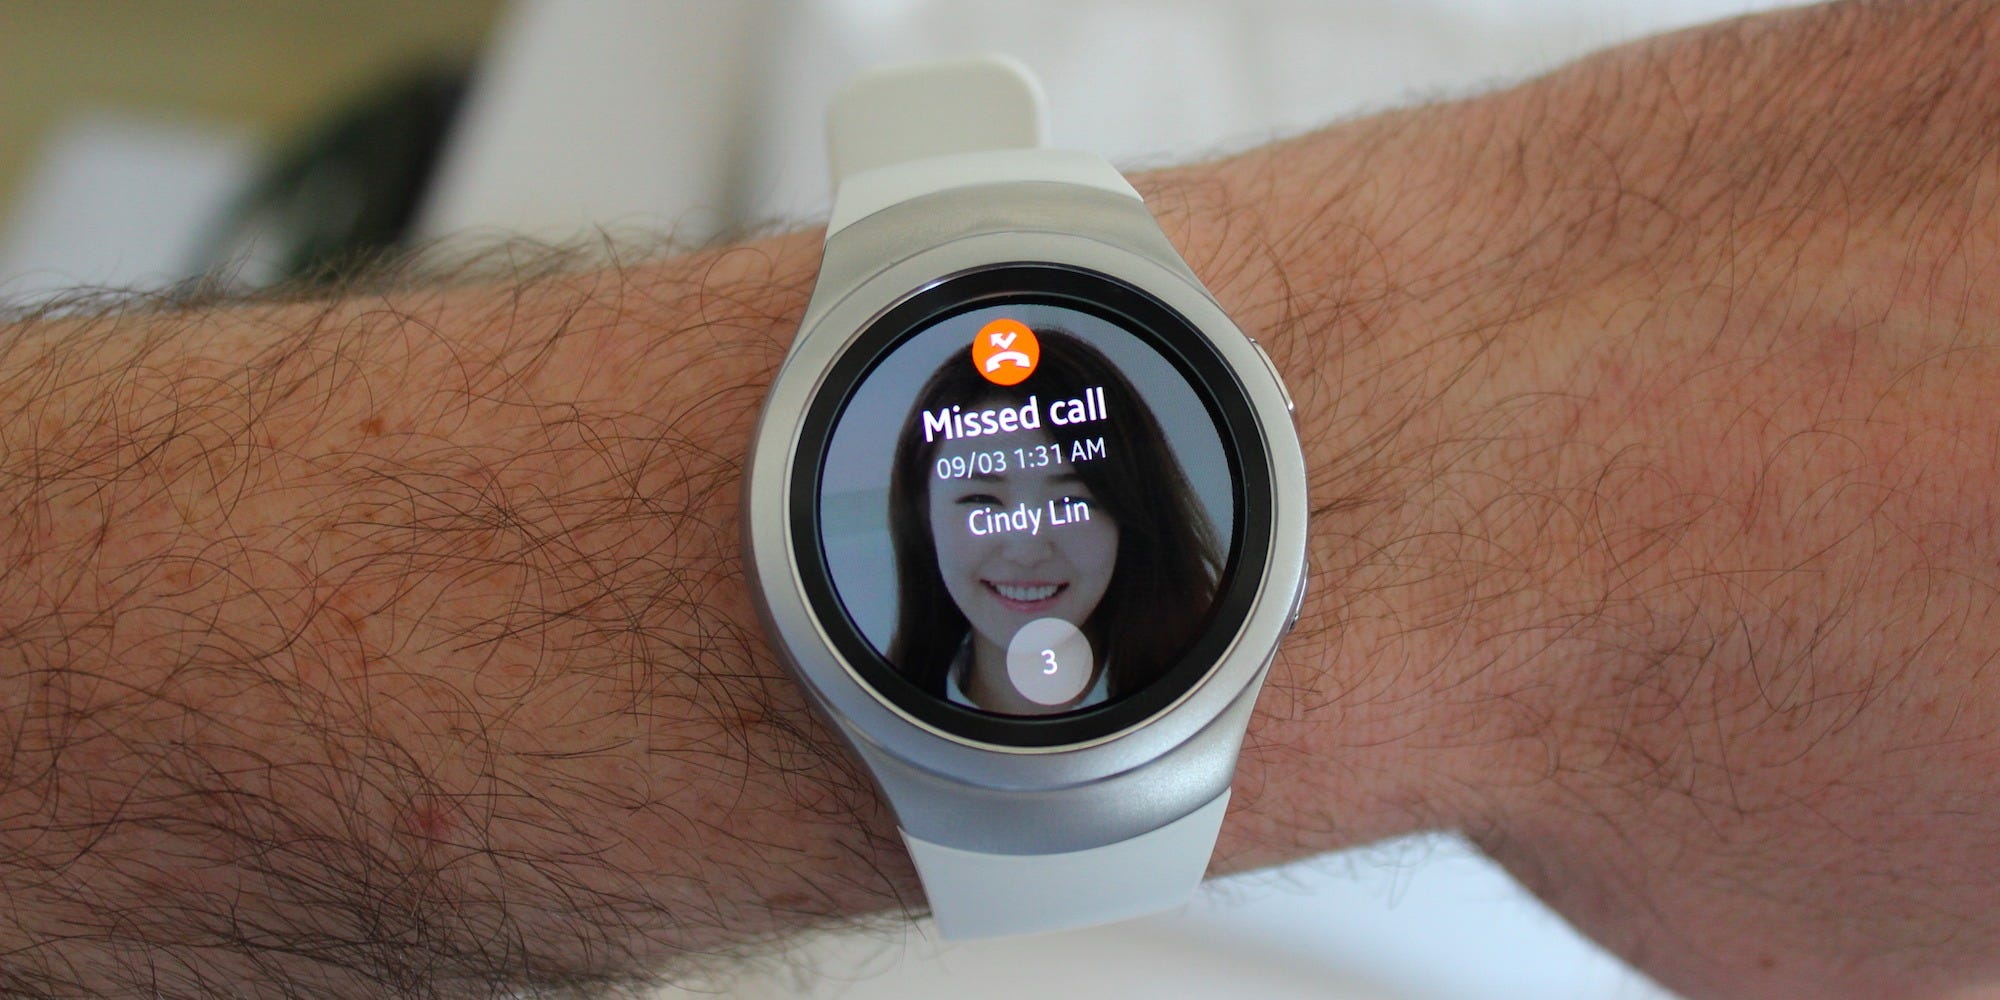 Samsung Gear S2 missed call notification